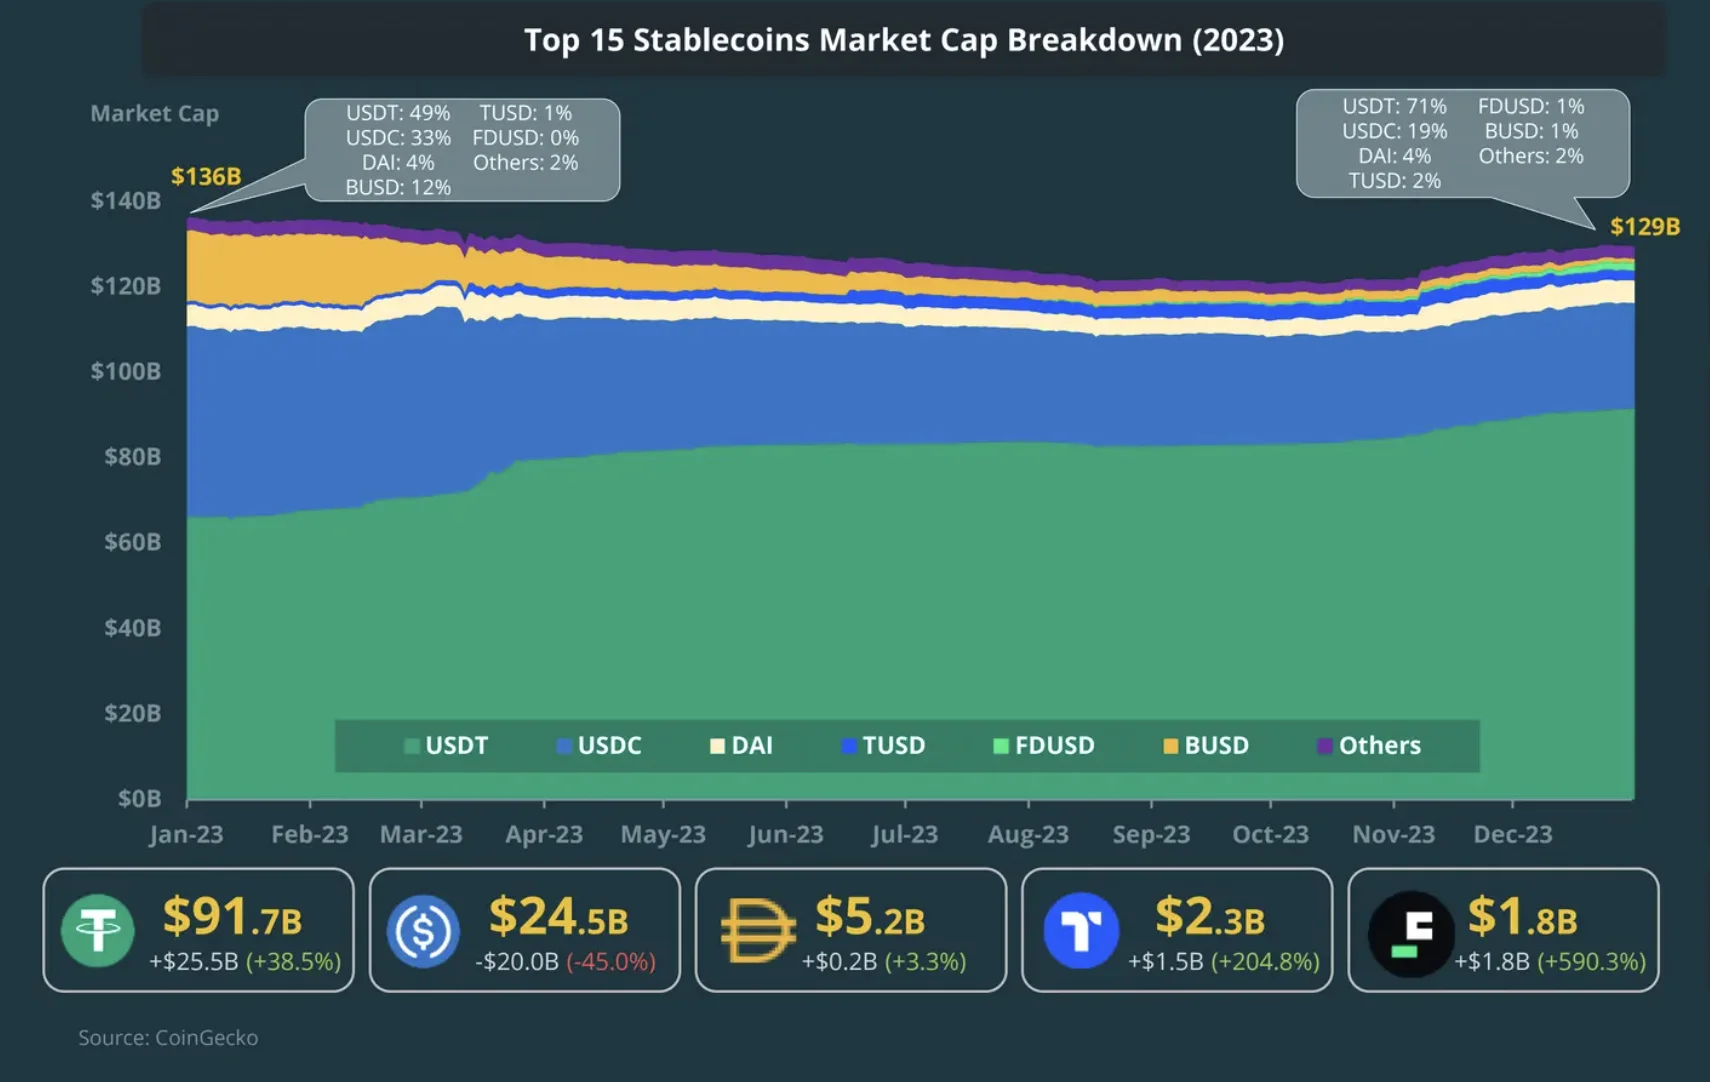 Top 15 Stablecoins of 2023 